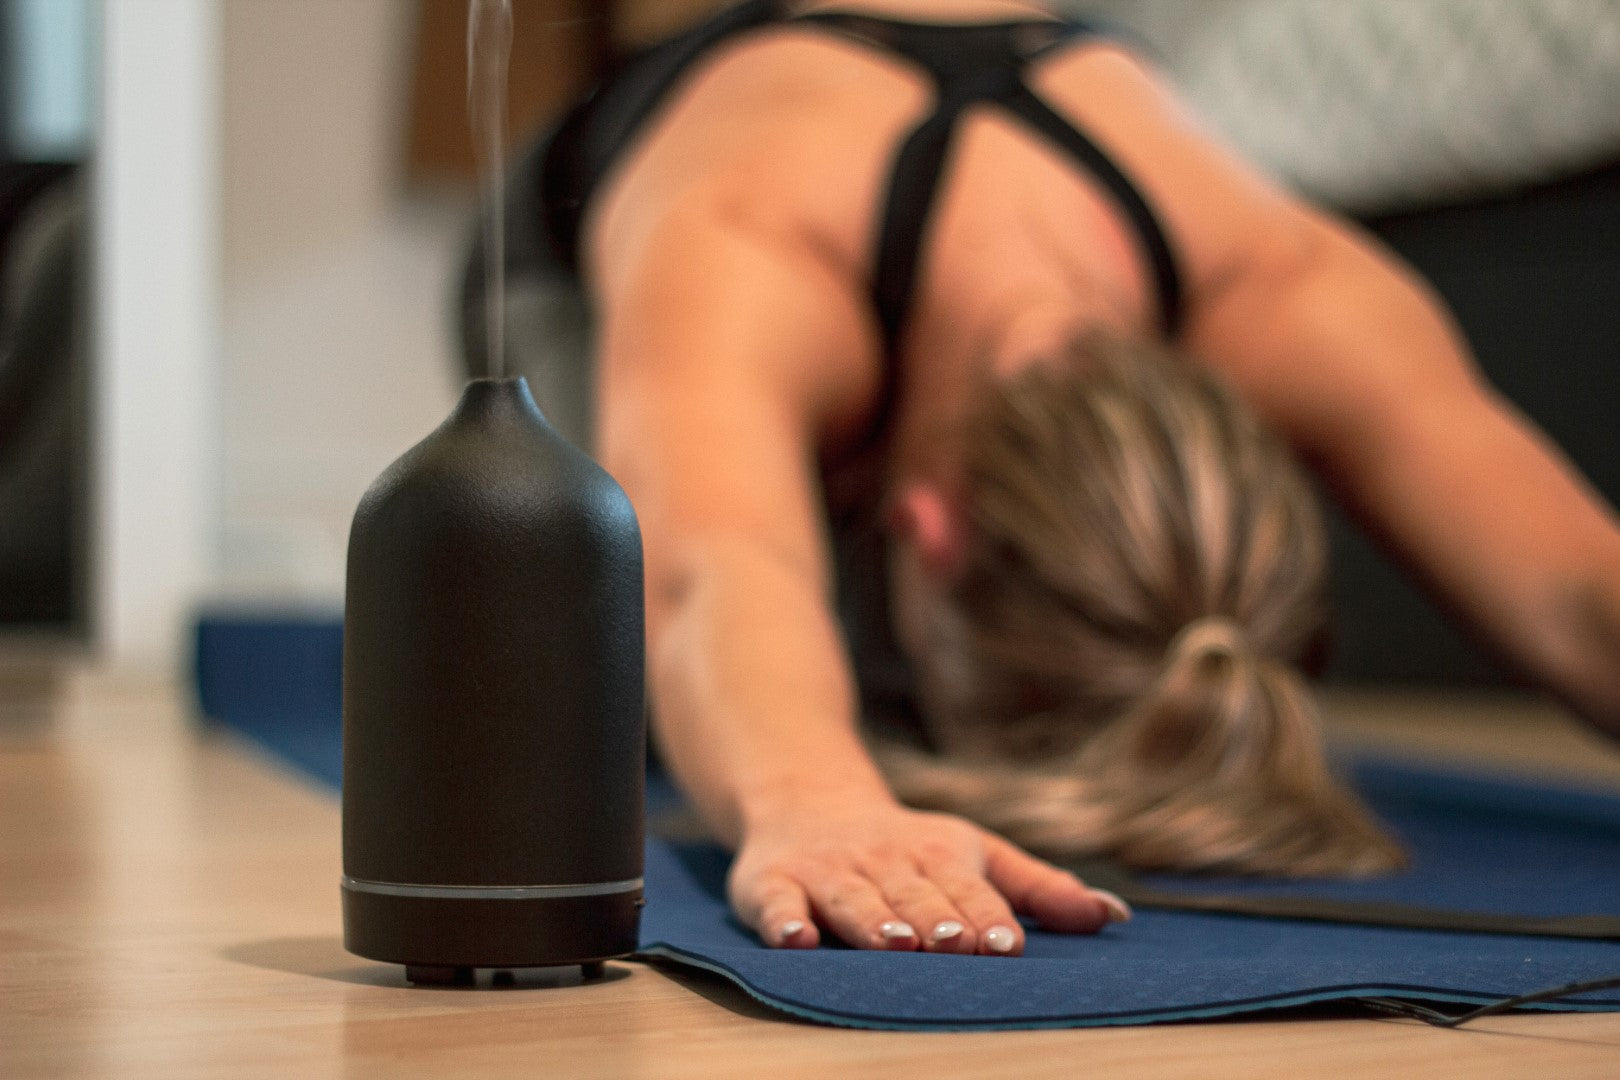 Practice made perfect: How to use essential oils for yoga